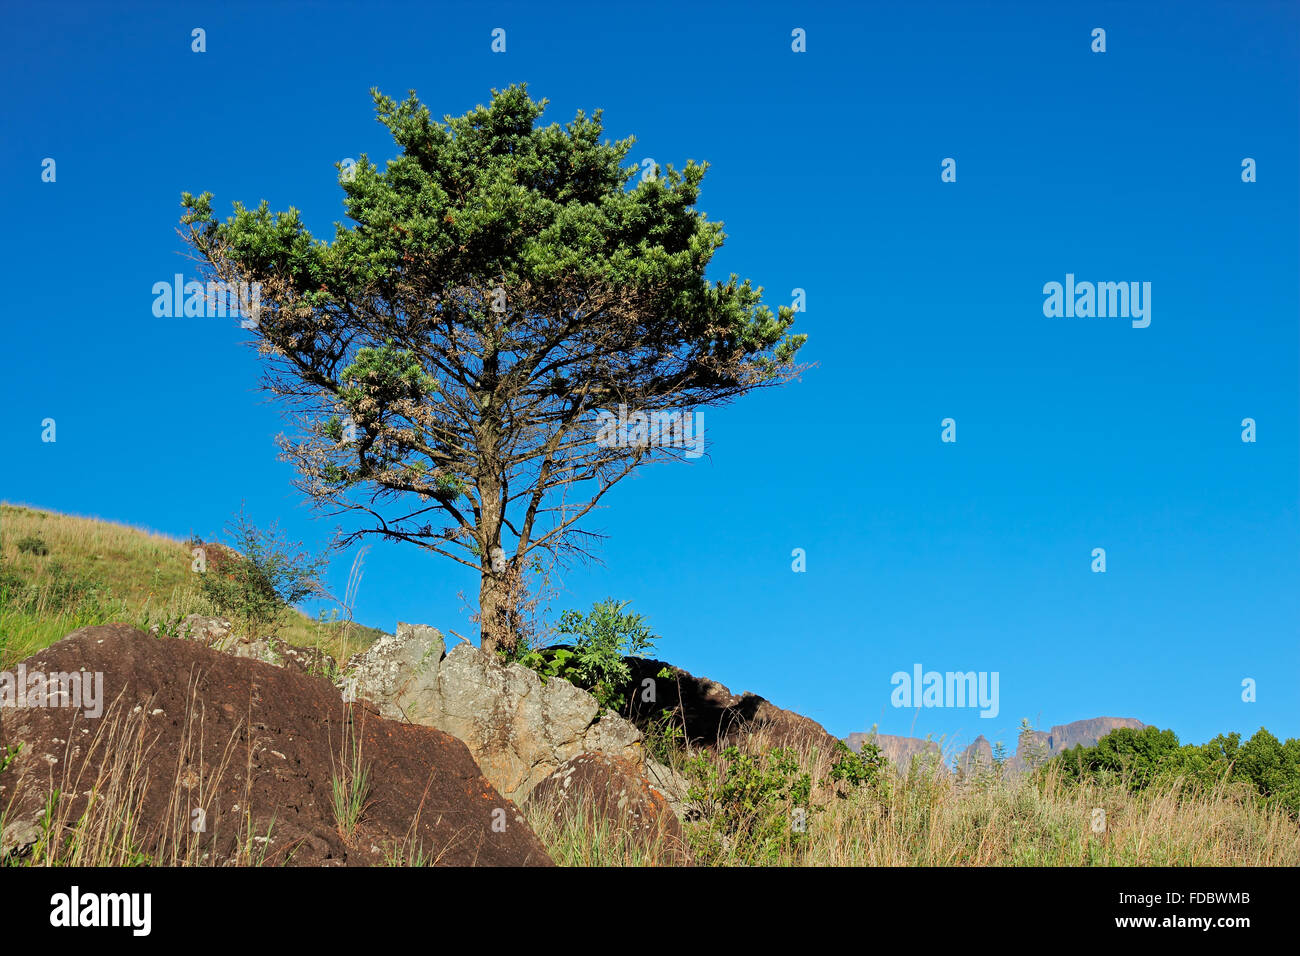 African landscape with a tree on a rocky ridge against a blue sky Stock Photo